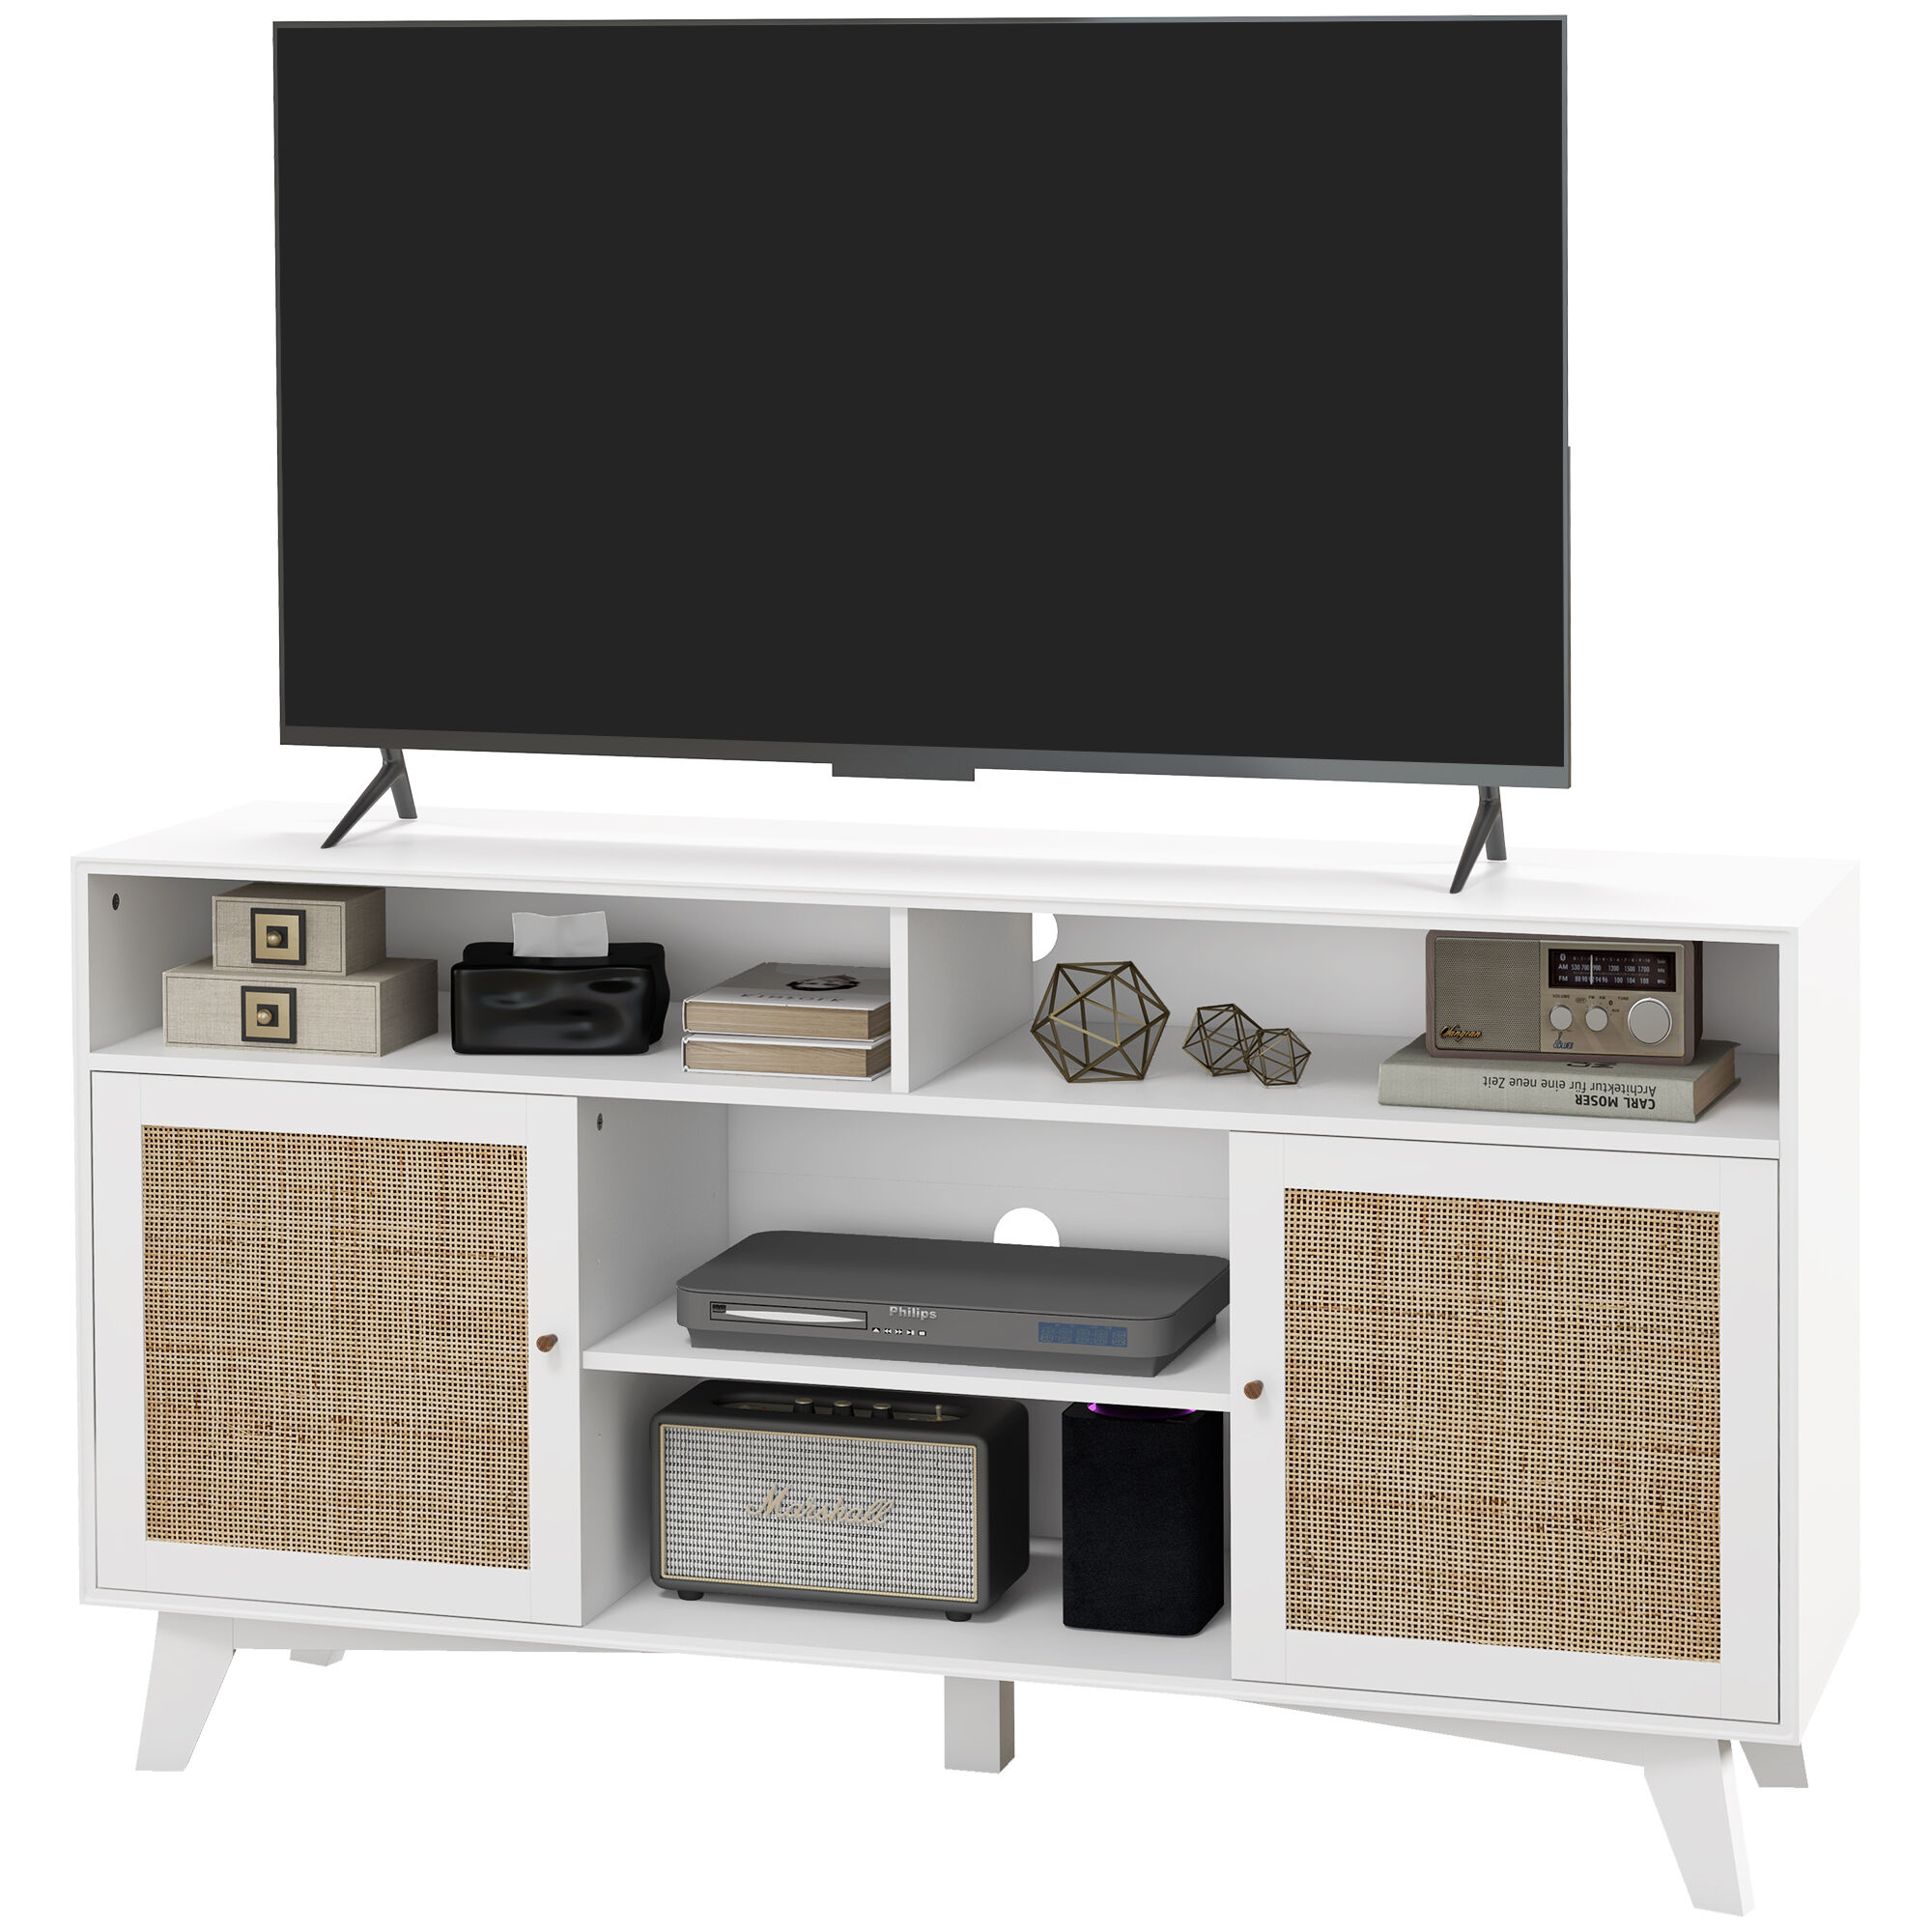 HOMCOM TV Console with Rattan Doors, Adjustable Shelves, and Cable Management for 65" TVs